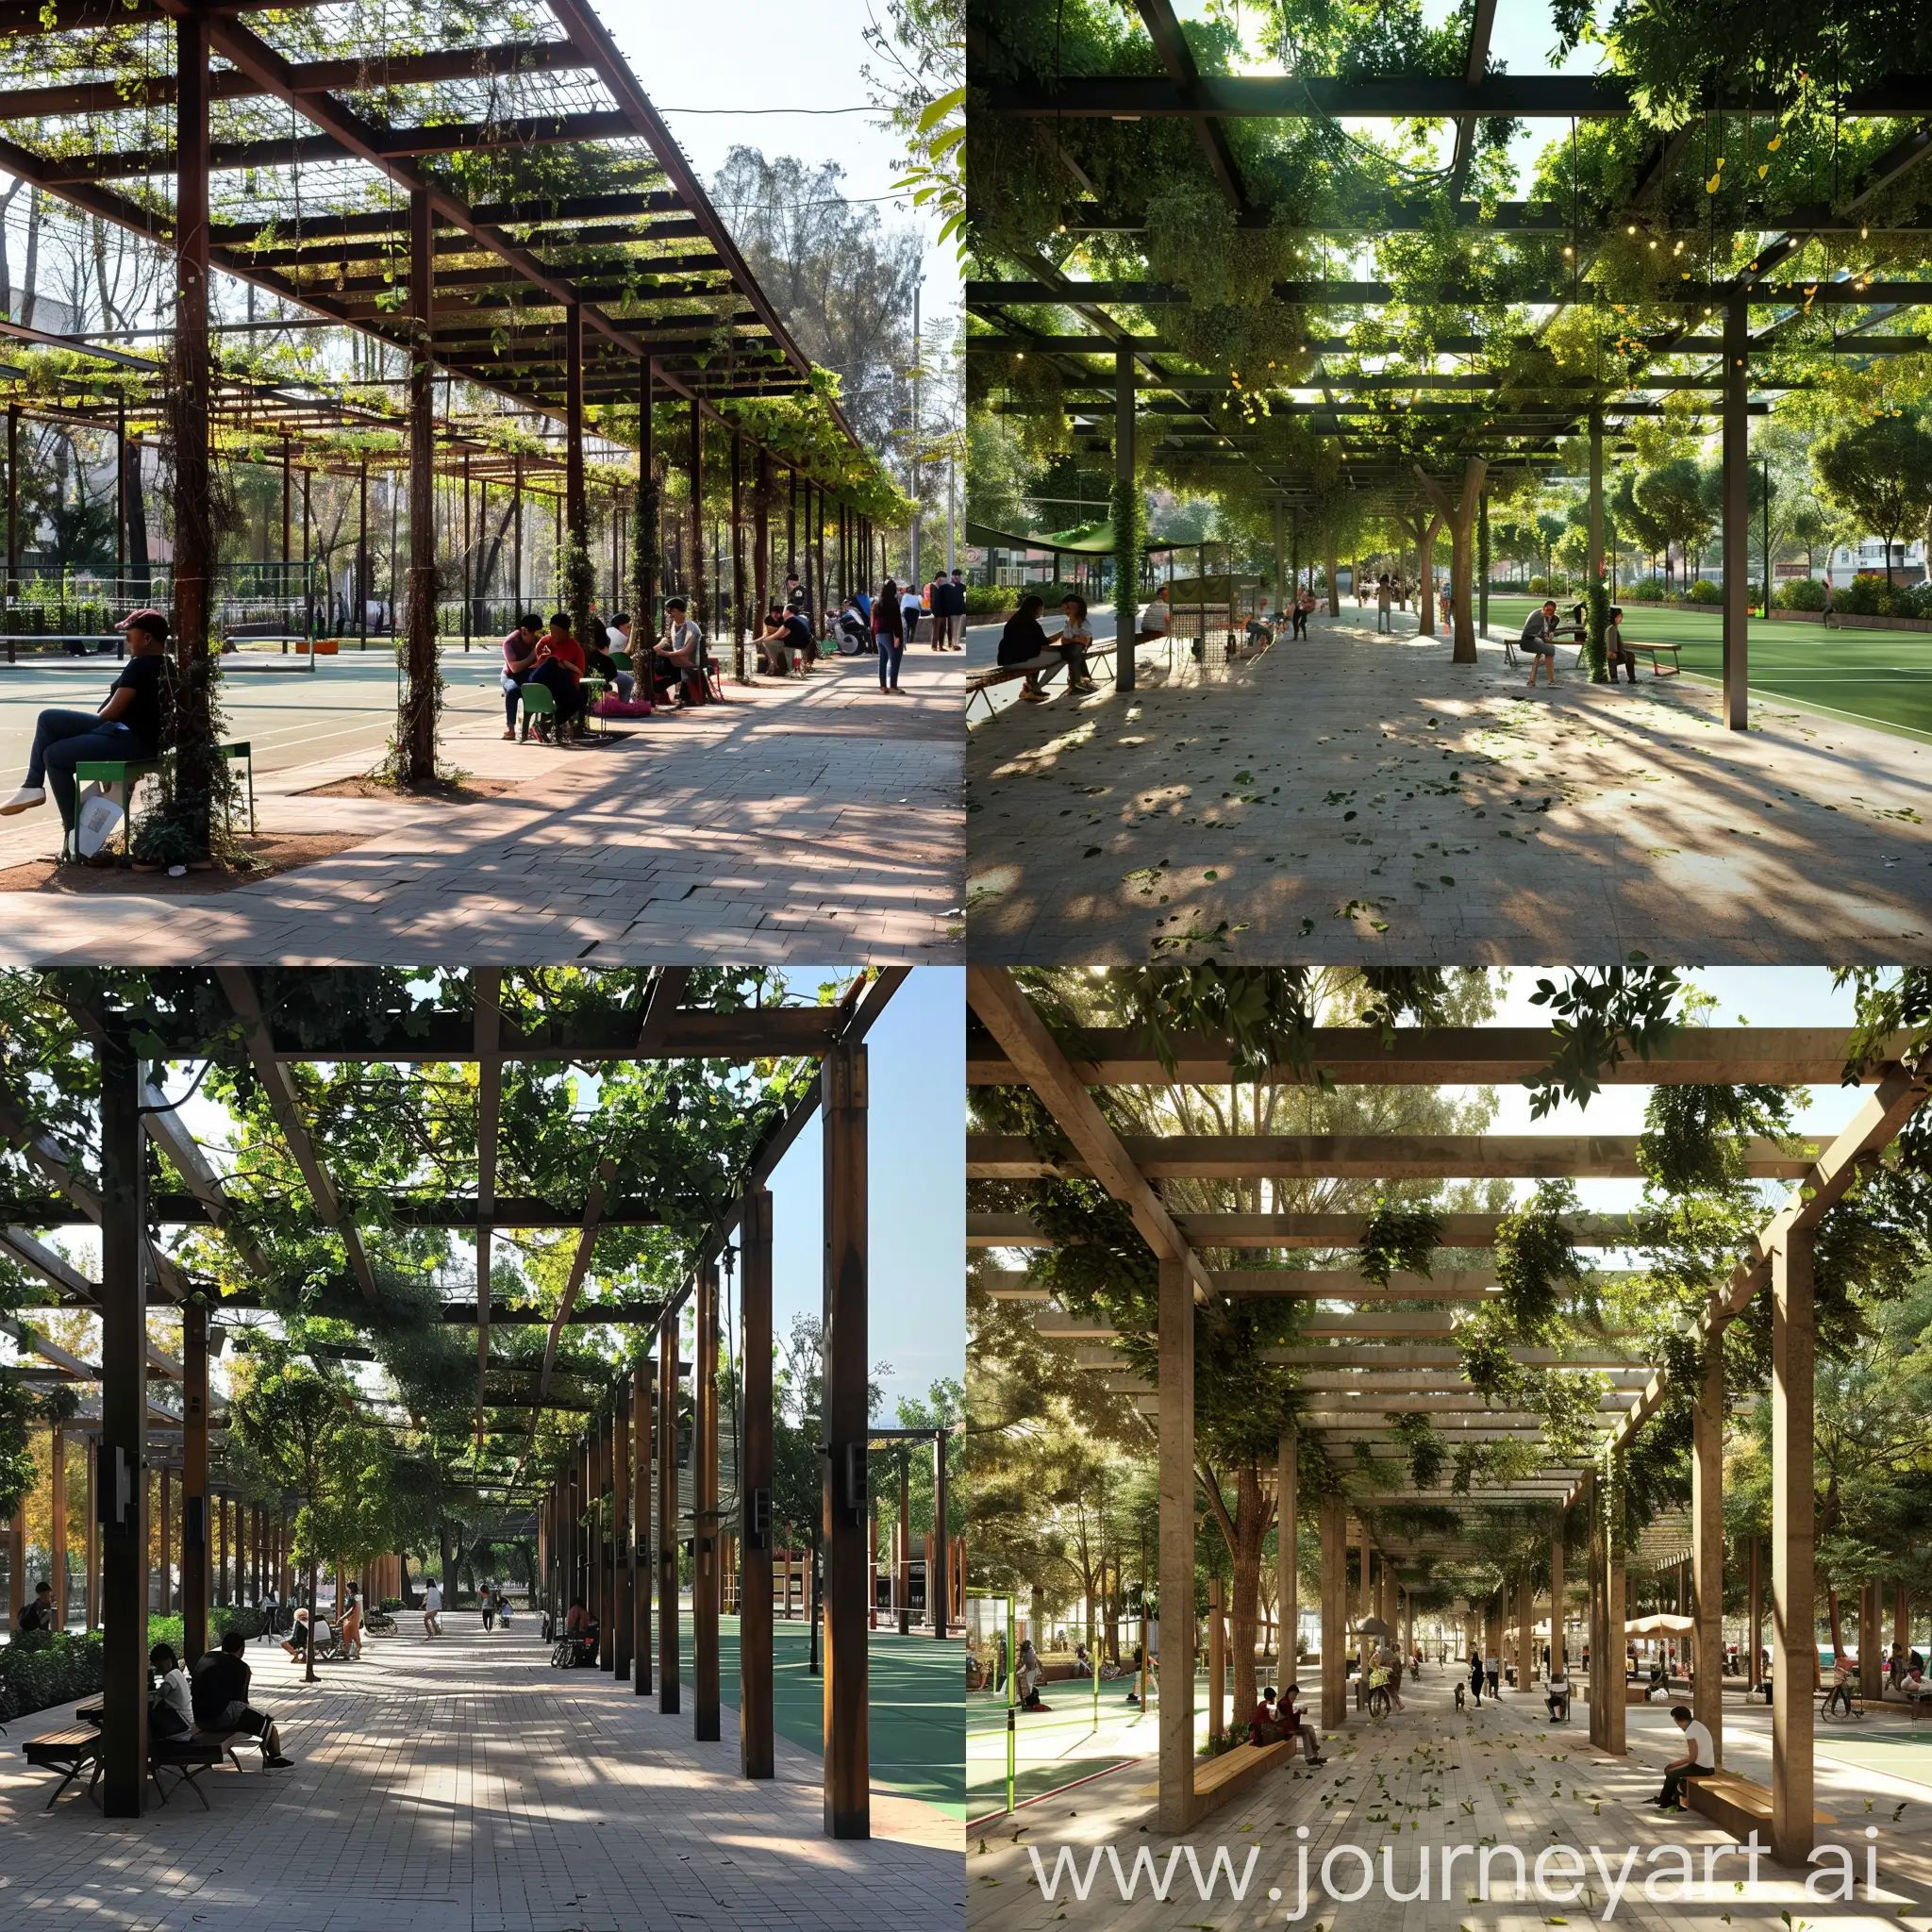 Urban-Parks-with-Pergolas-and-Sports-Courts-Vibrant-Green-Spaces-for-Recreation-and-Relaxation